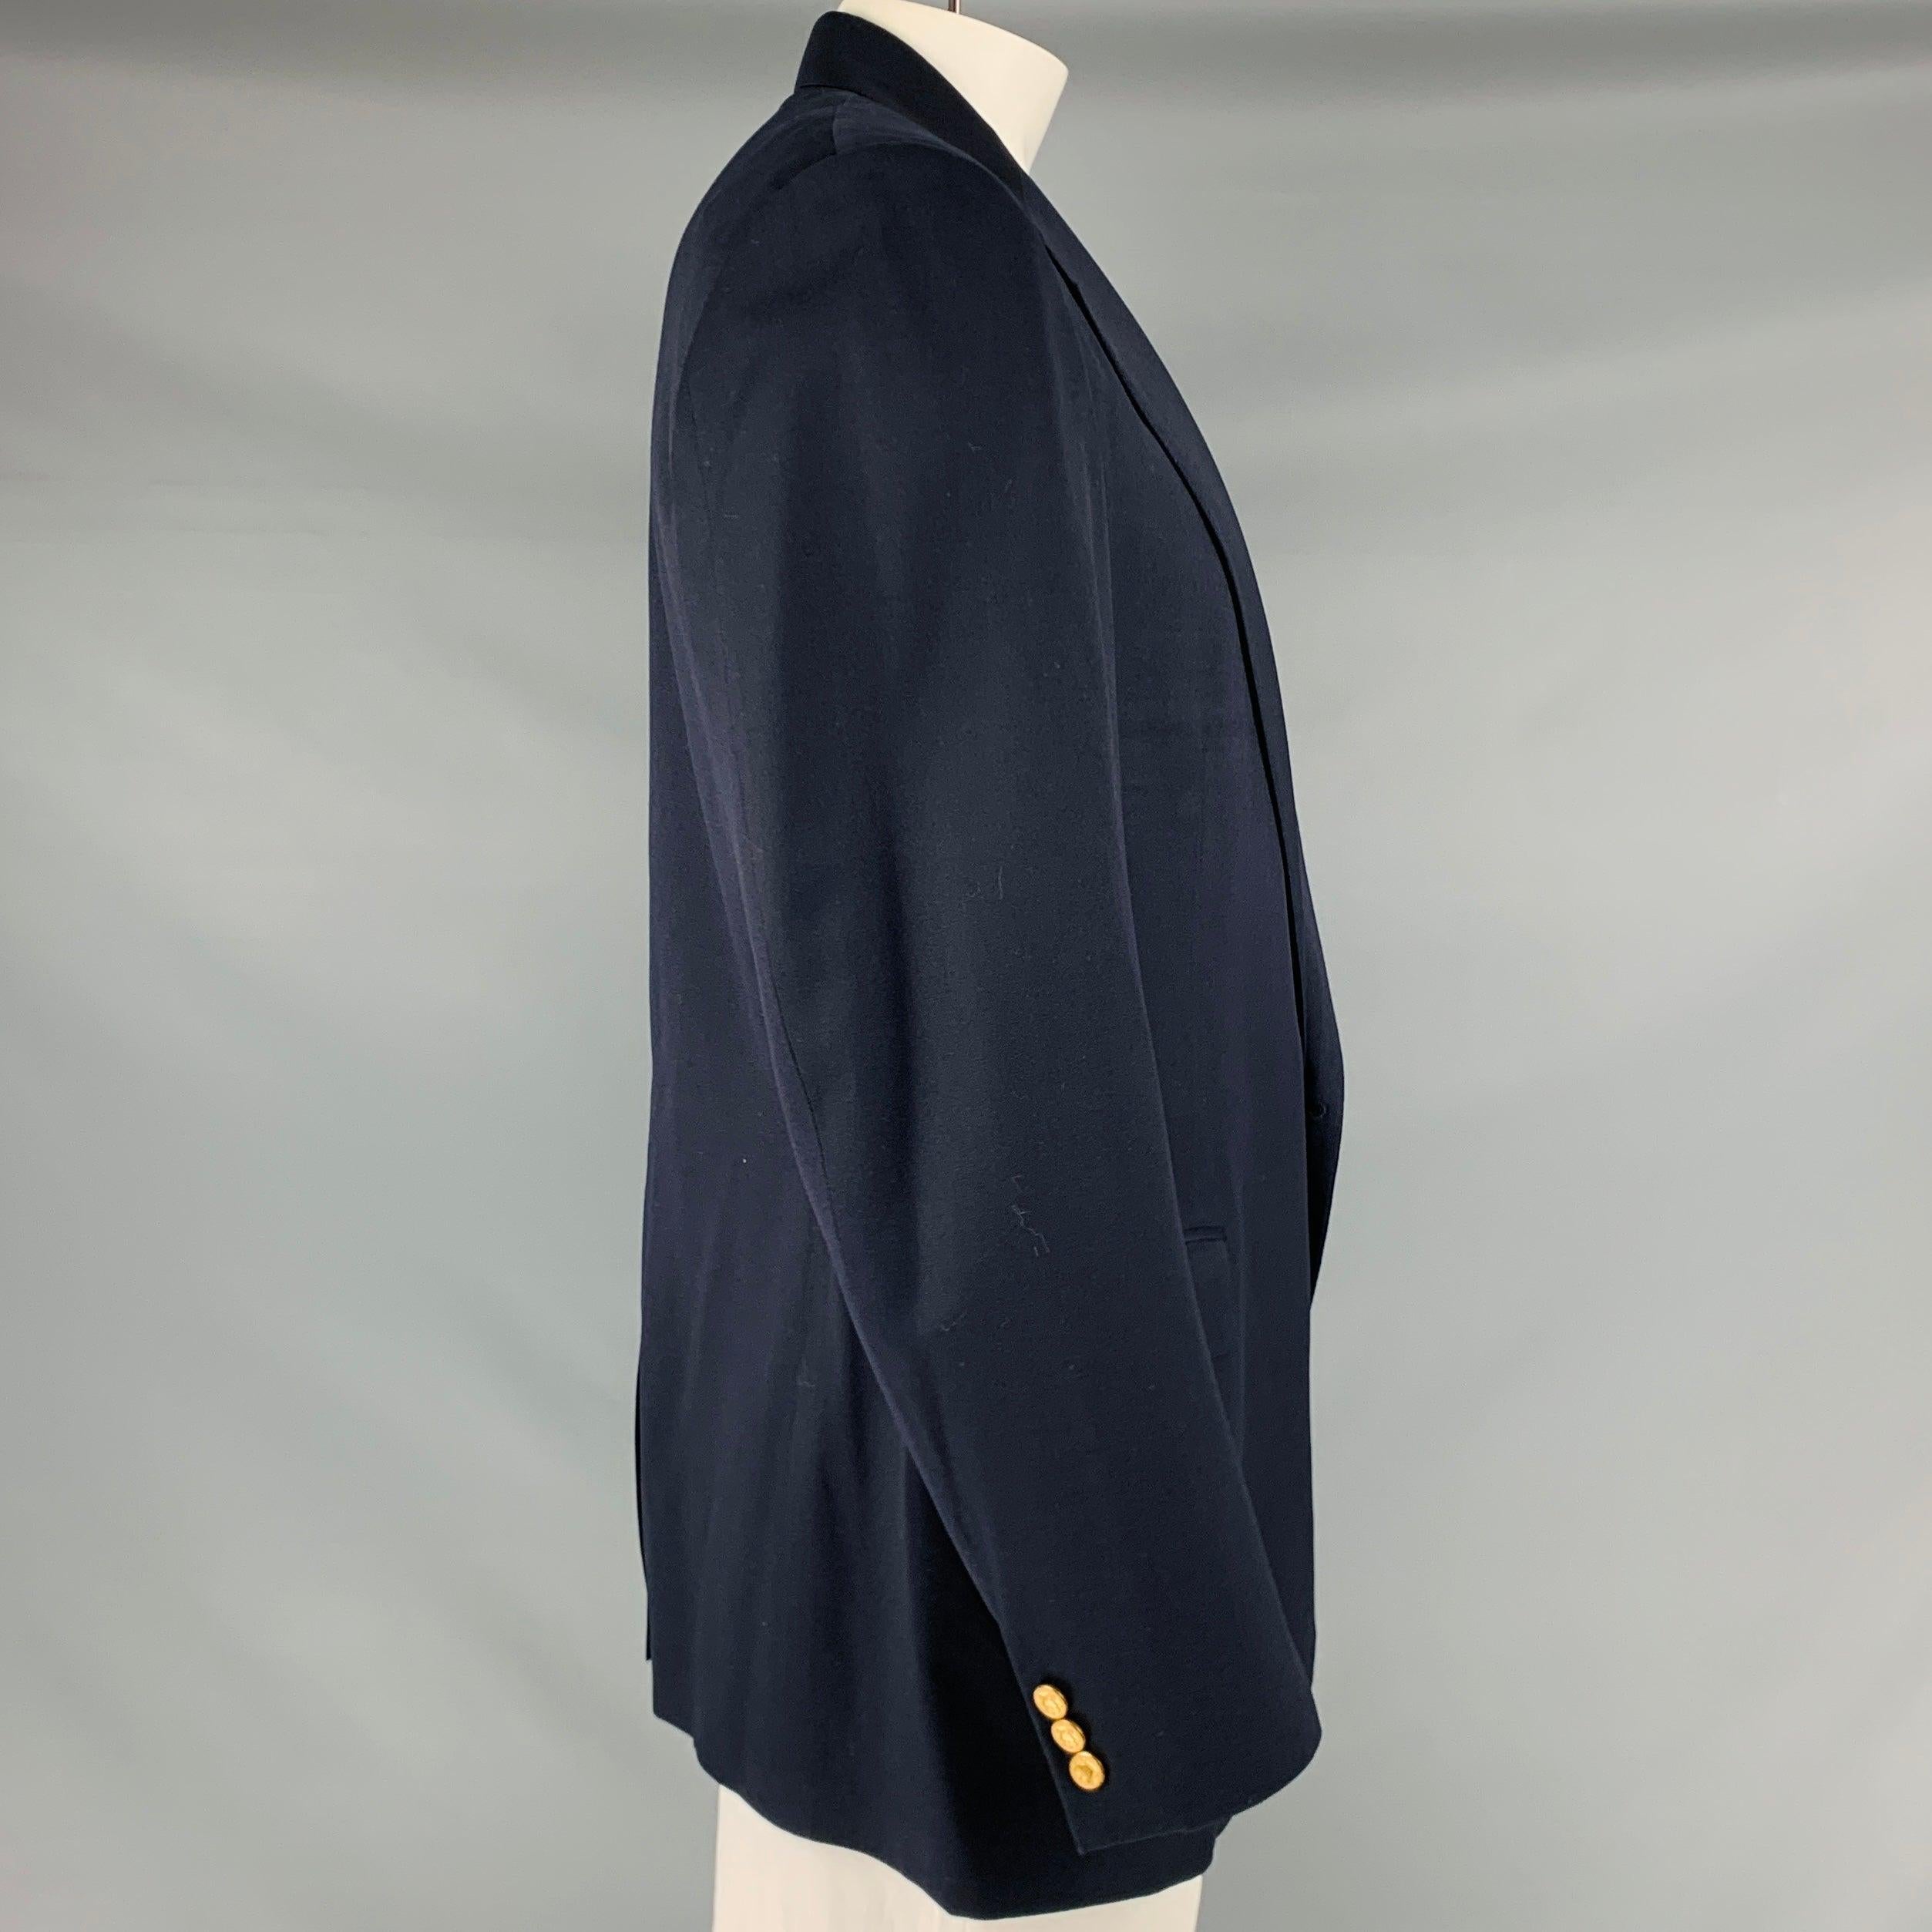 POLO by RALPH LAUREN sport coat
in a navy wool fabric featuring notch lapel, three pockets, and double button closure. Made in Italy.Very Good Pre-Owned Condition. Minor signs of wear. 

Marked:   size not marked, fabric tag faded. 

Measurements: 
